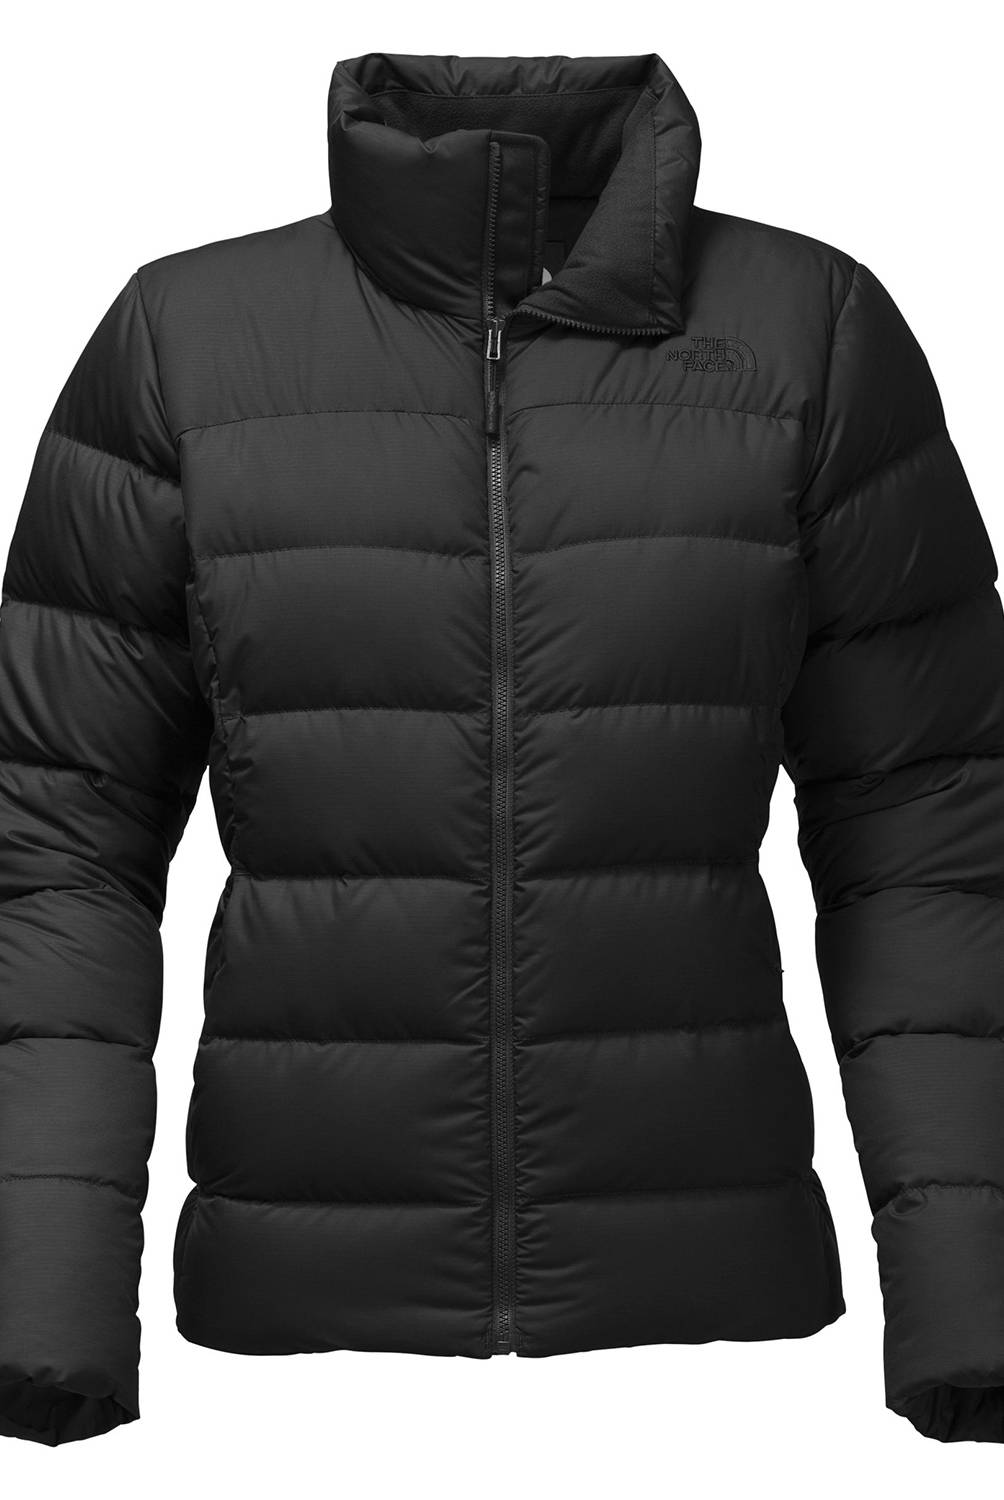 THE NORTH FACE - NORTH 33P9A0M